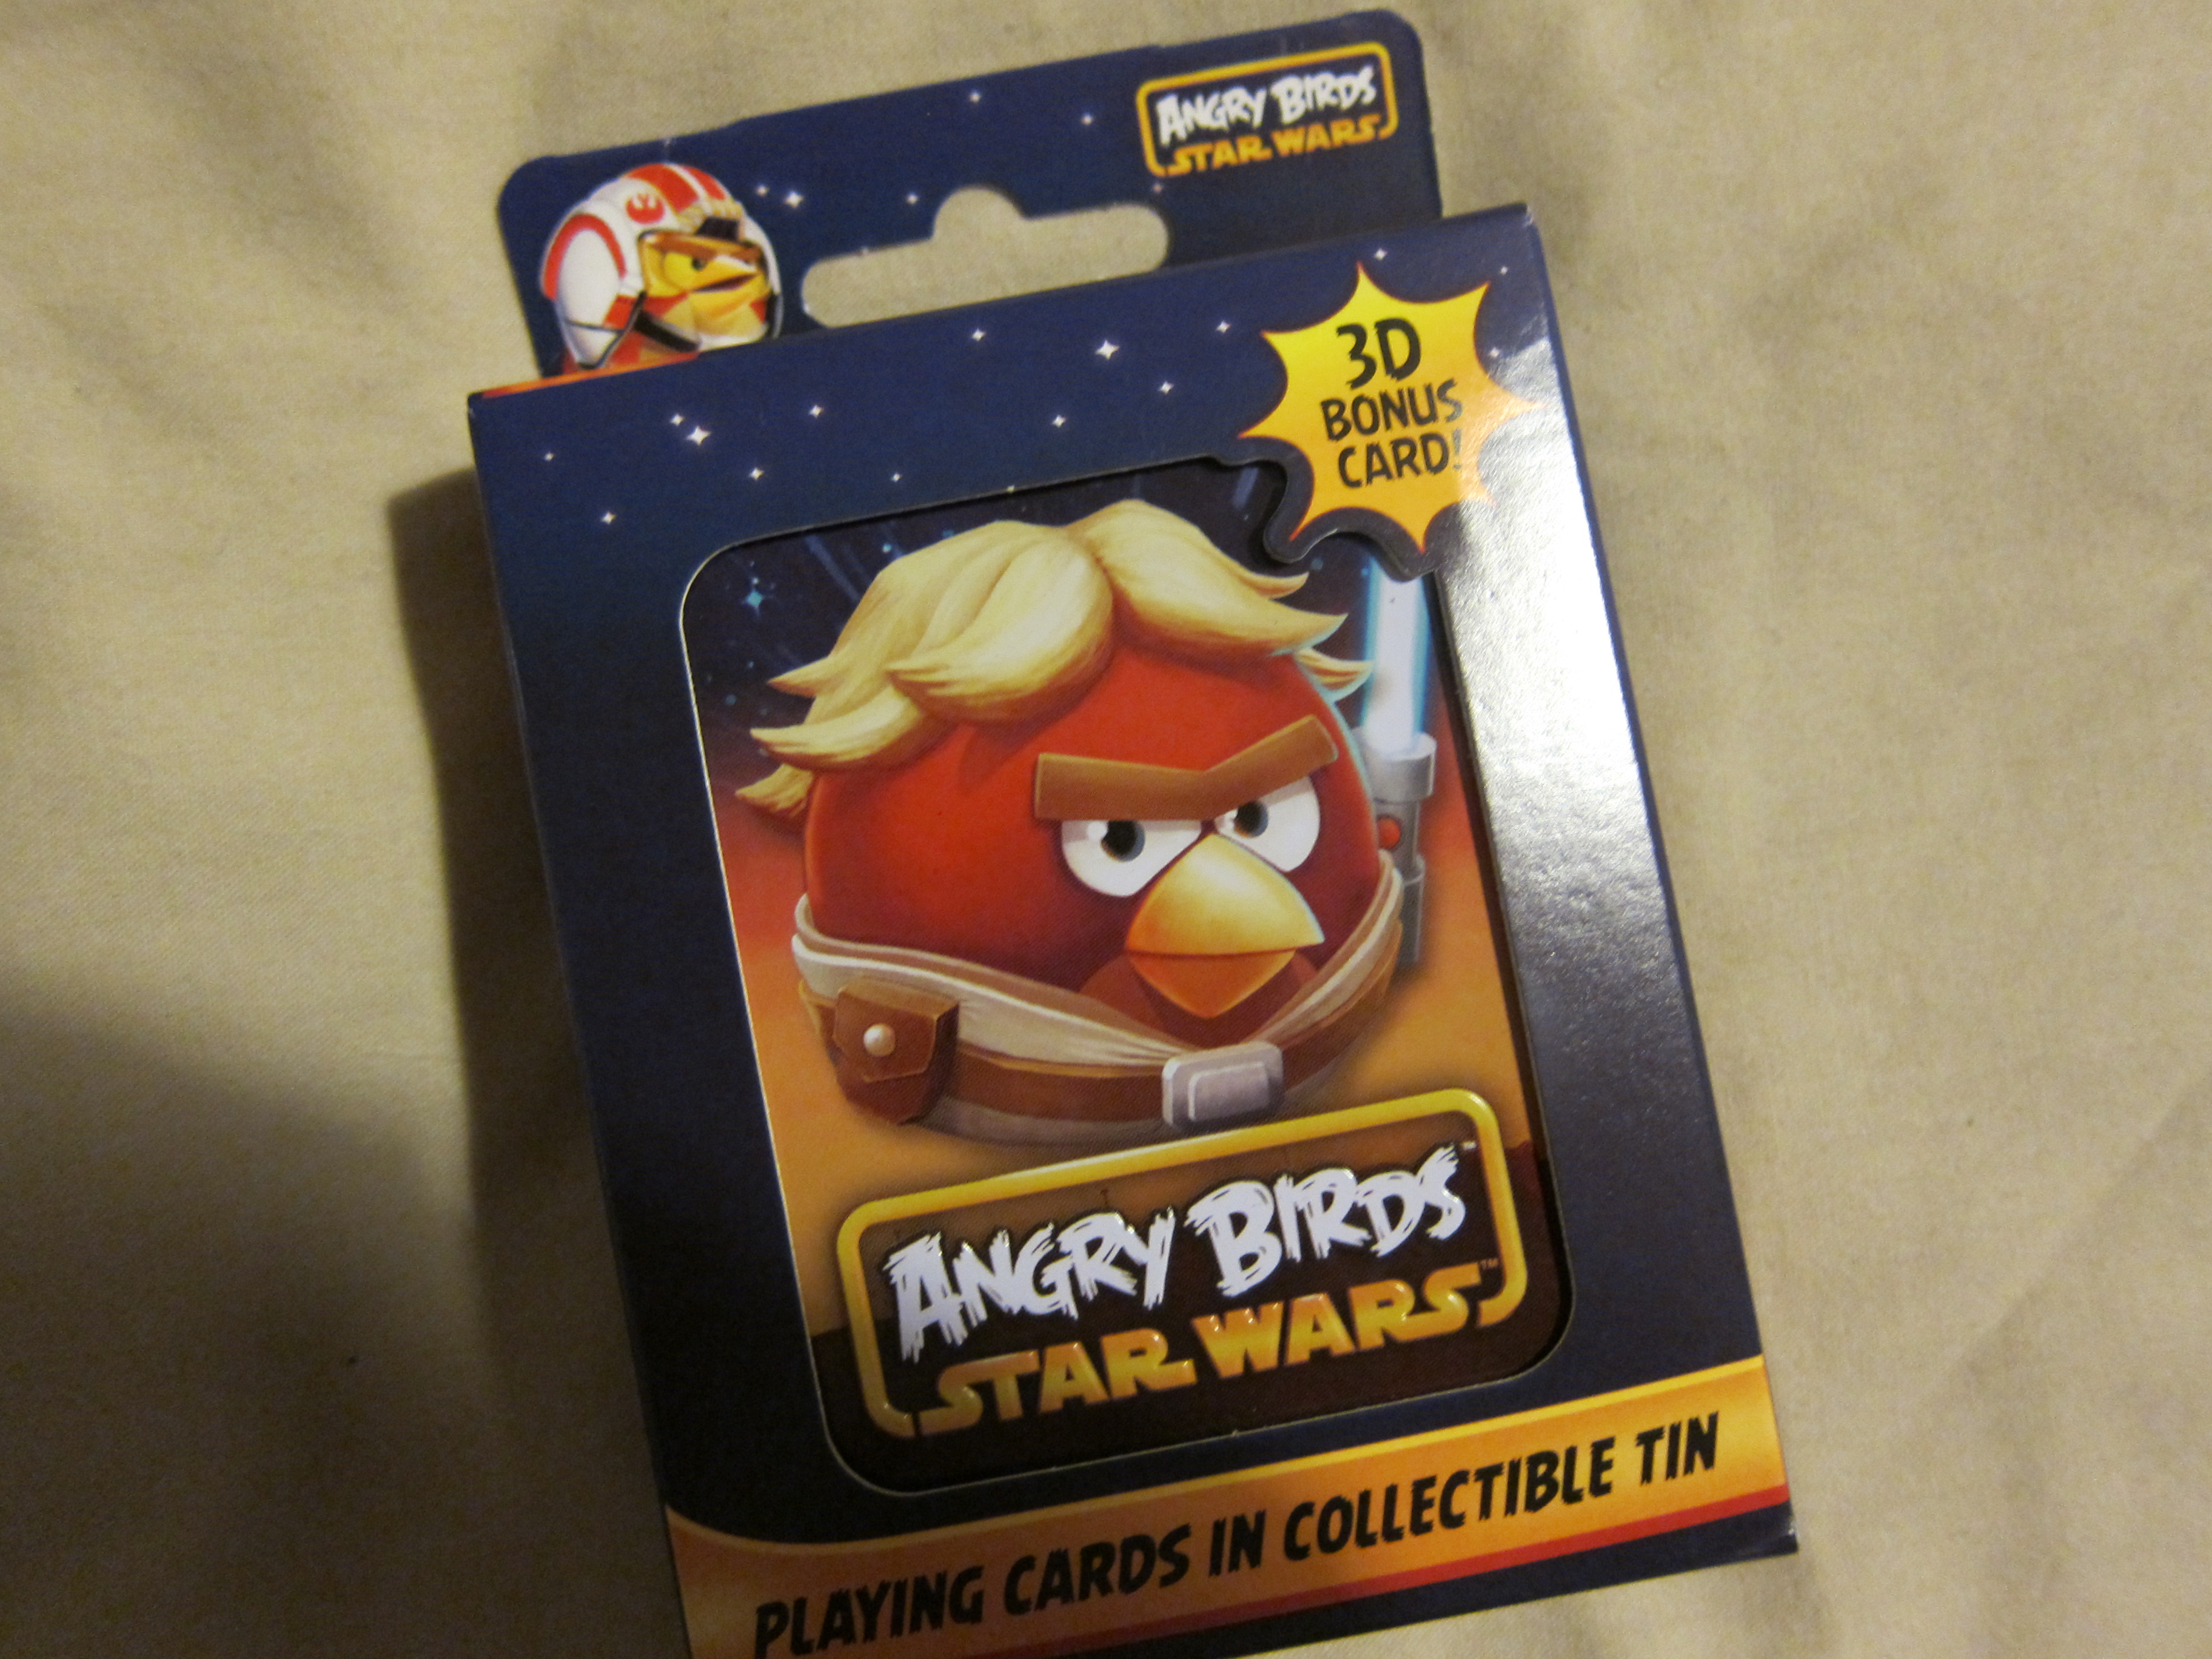 10 X Angry Birds Star Wars Playing Cards Bundle NEW SEALED Game Play Joblot 